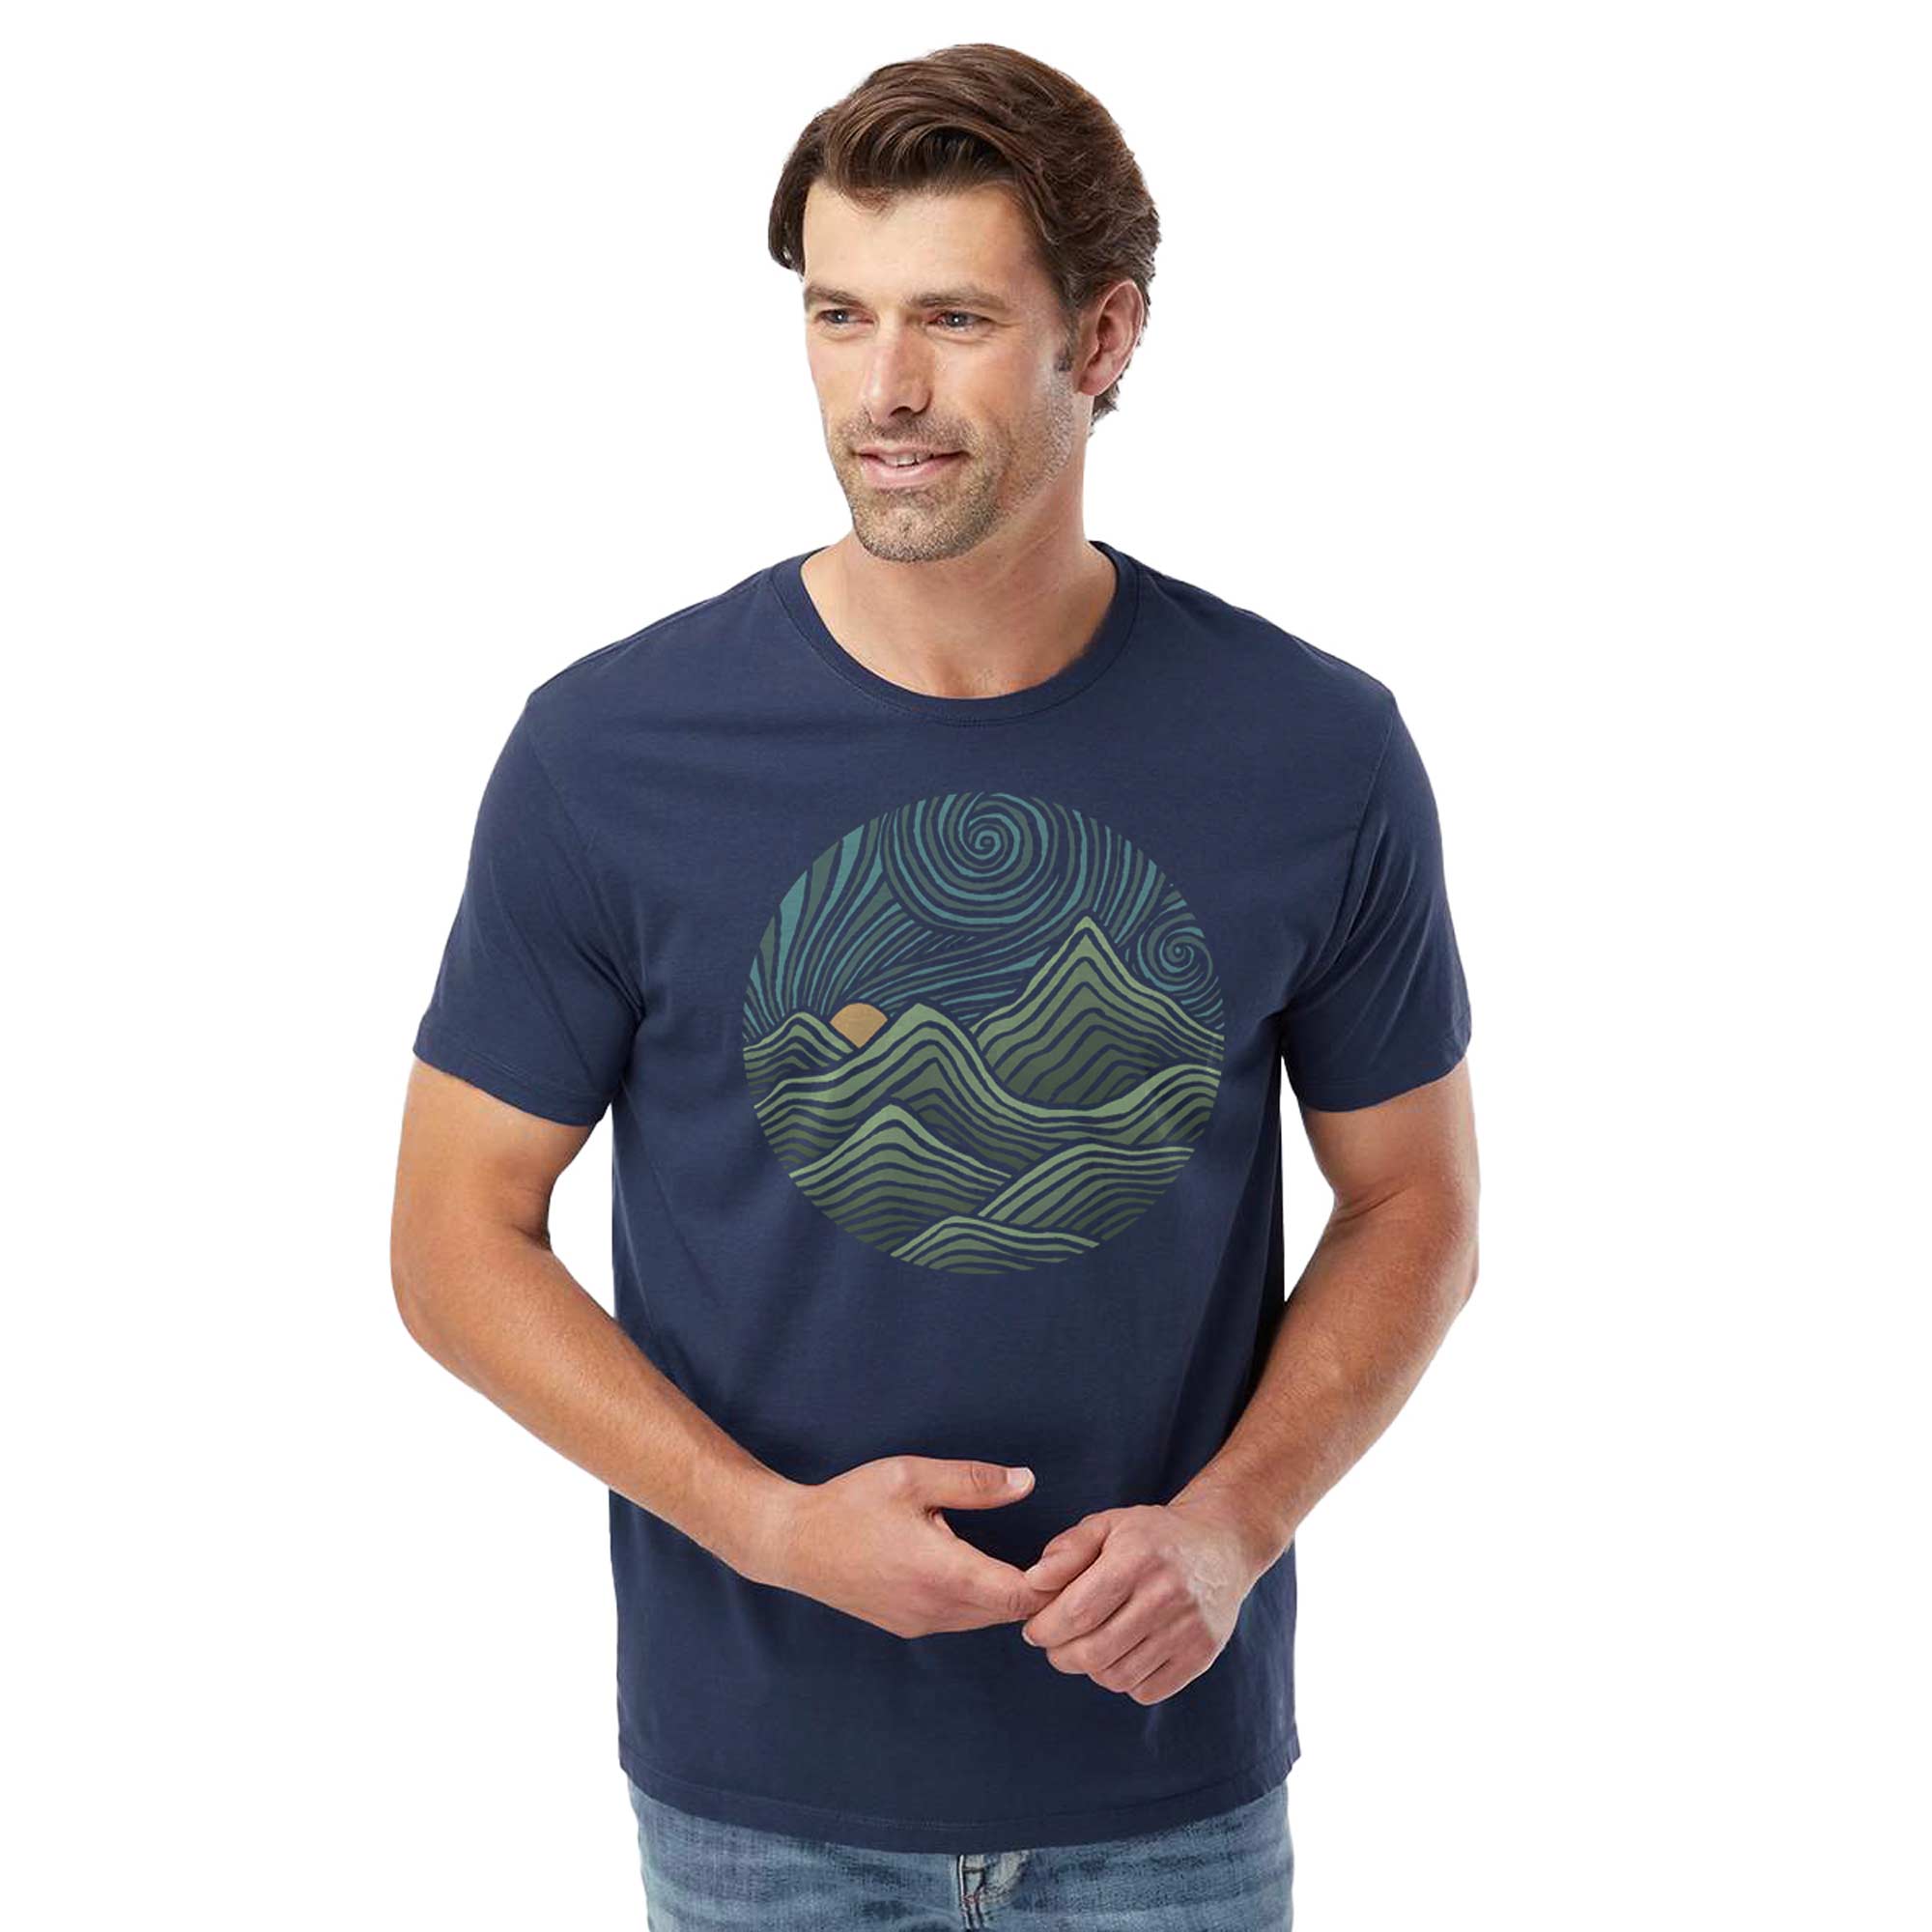 Swirly Mountains | Design By Dylan Fant Cool Organic Cotton T-shirt | Vintage Artsy Nature Tee Model | Solid Threads